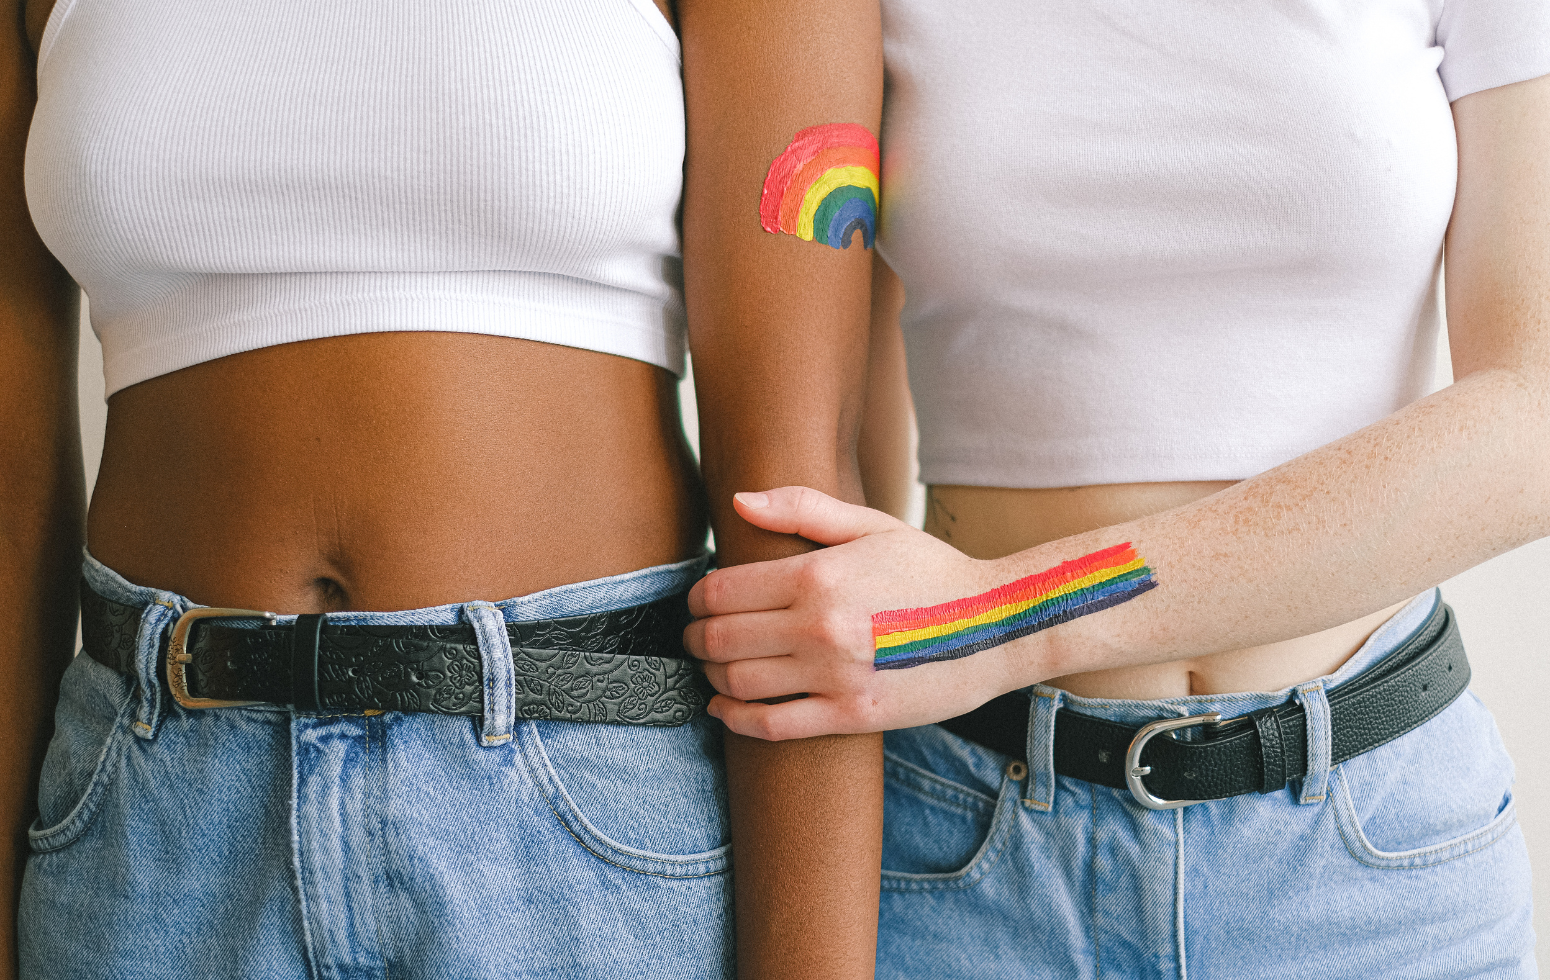 Overcoming the Fear of Judgement About Your Sexuality